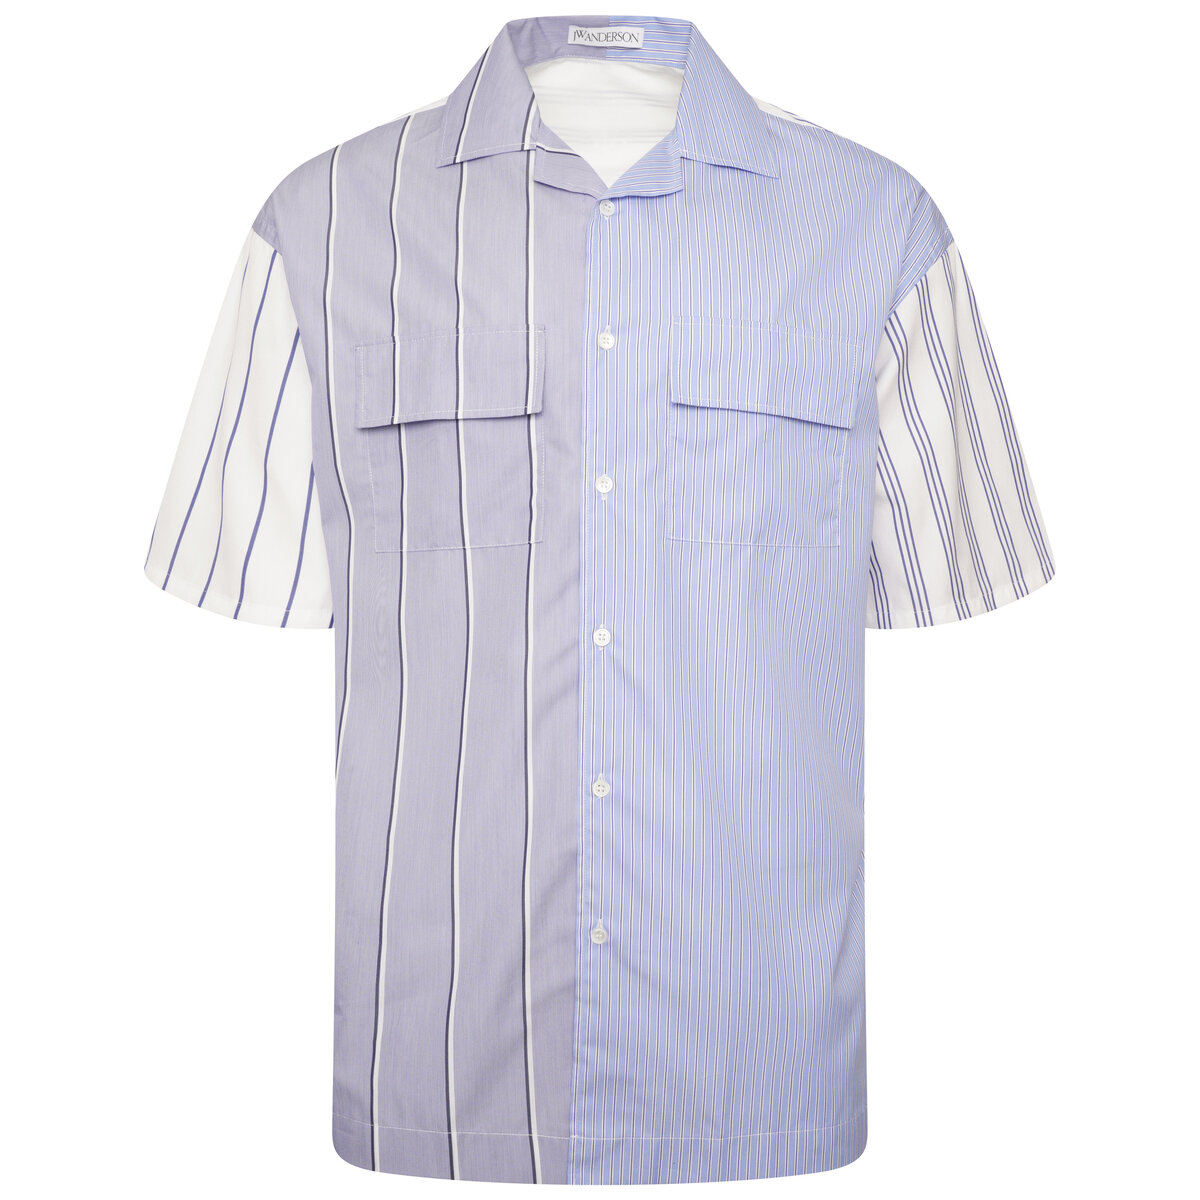 Relaxed Fit Short Sleeve Striped Shirt 50 Blue/white